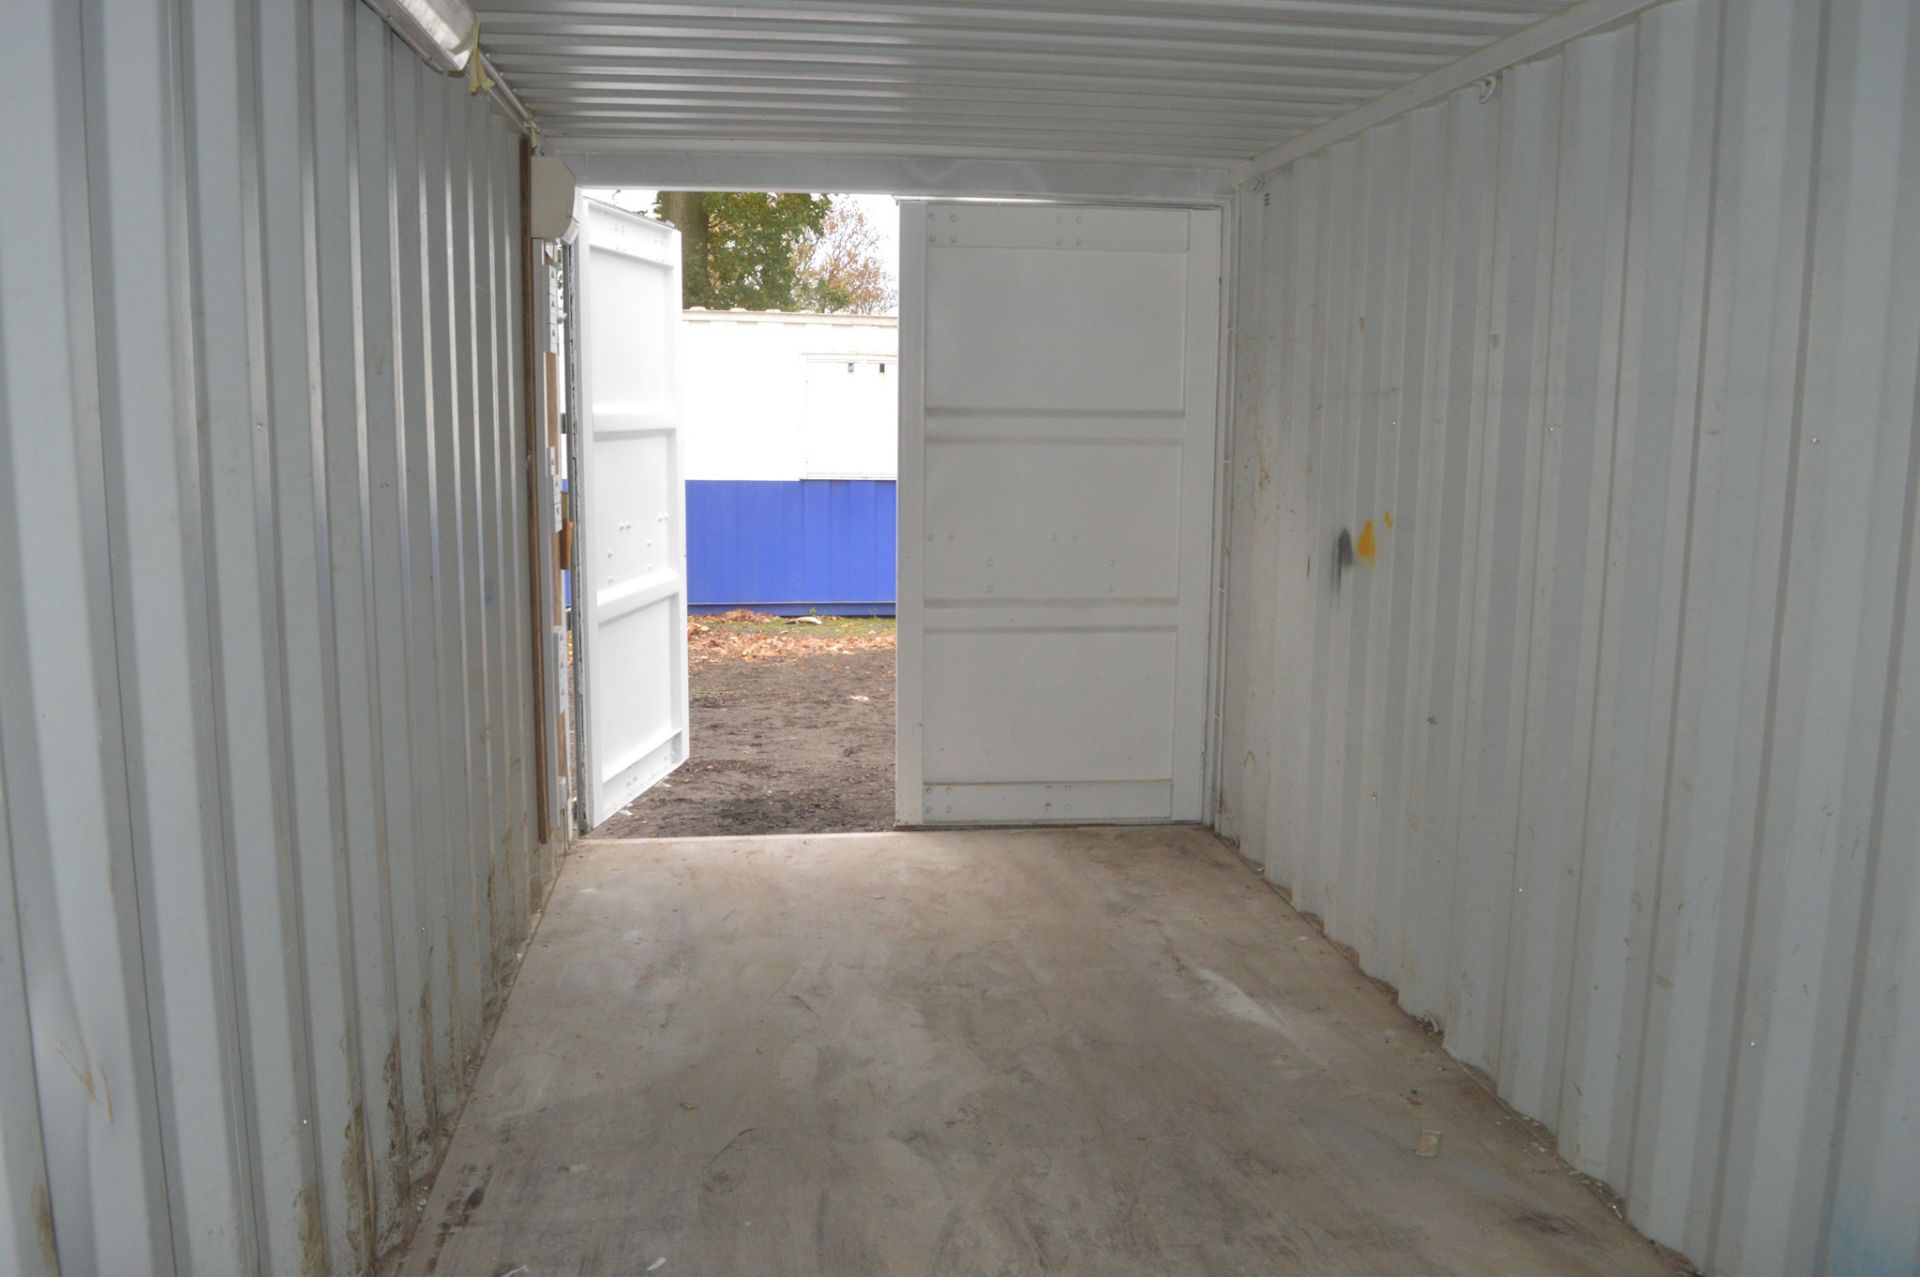 20 ft x 8 ft steel anti vandal shipping container BB34655 - Image 6 of 6